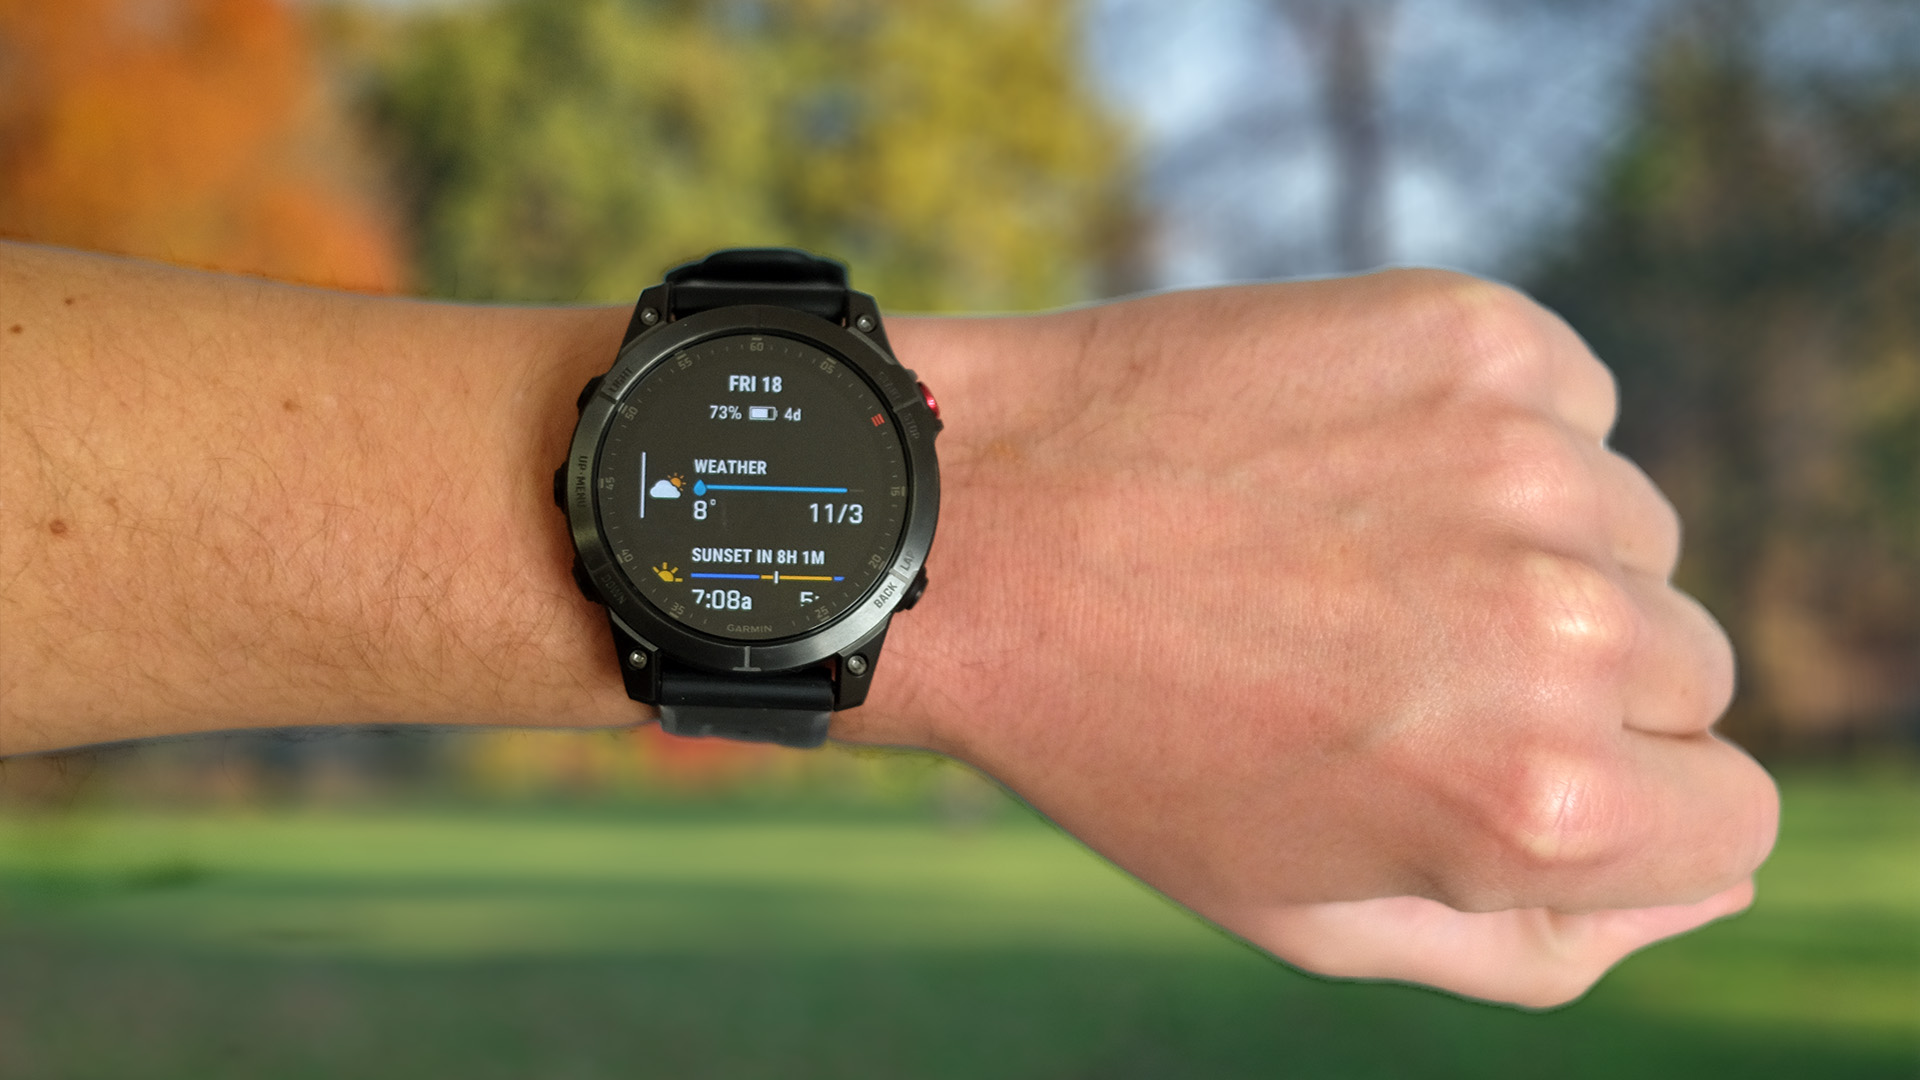 Garmin Epix 2 worn on the person's wrist displays the weather on the watch face